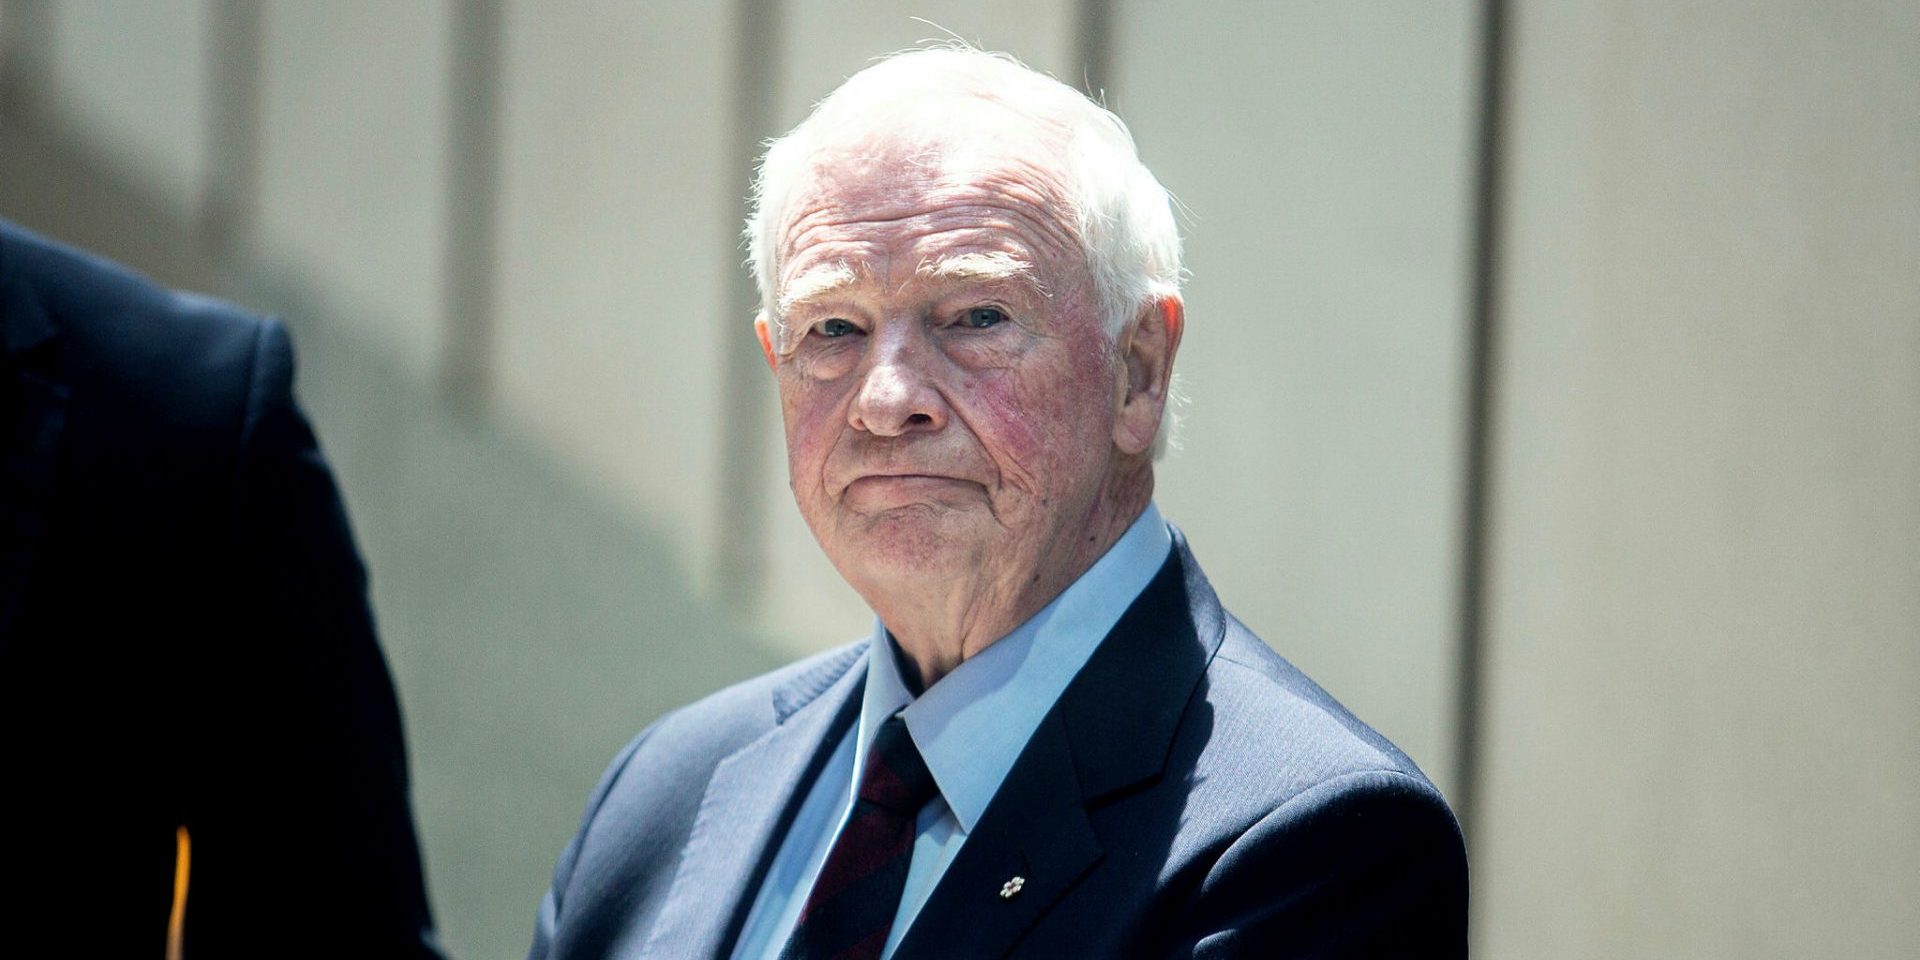 David Johnston, independent special rapporteur on foreign interference, holds a press conference in Ottawa on May 23 after presenting his first report. Andrew Meade